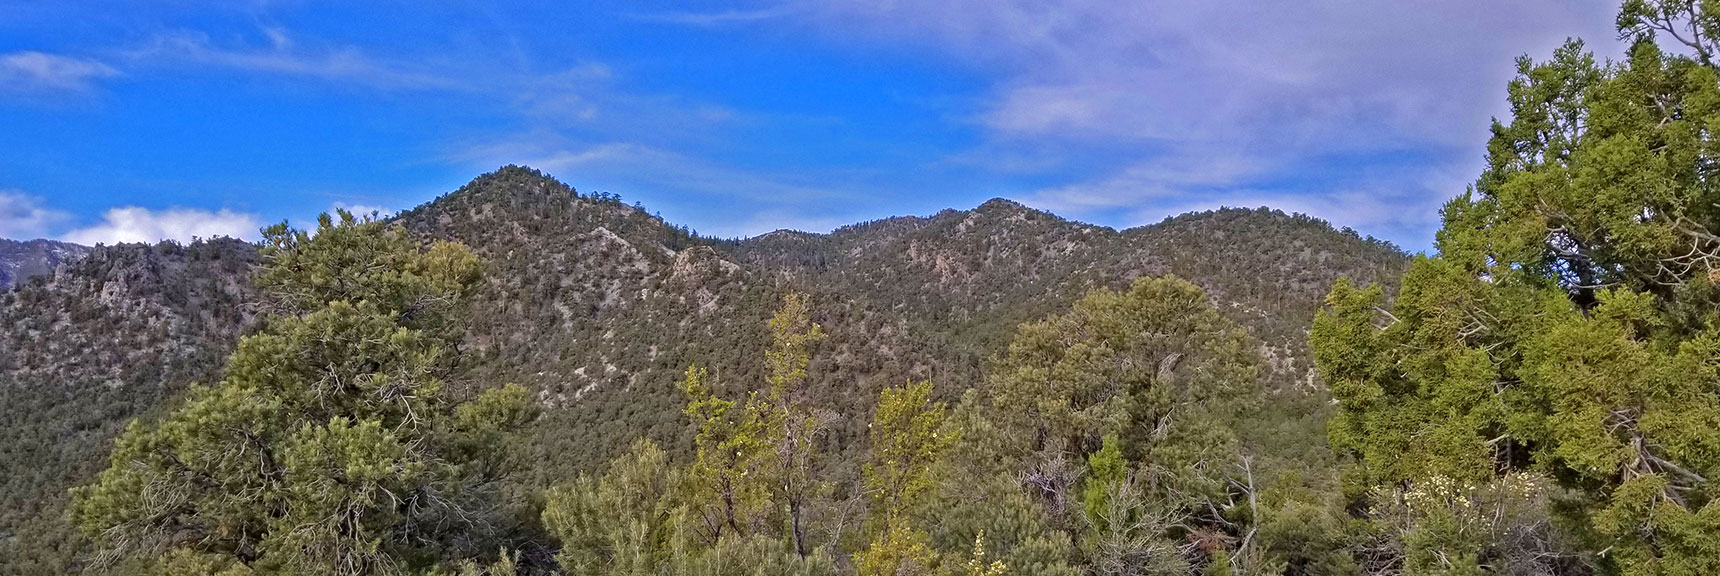 Three Hills at Trailhead Become Reference for Return Trip. First Turnoff Was At Saddle at Base of Right Hill.| Pinyon Pine Loop Trail | Sawmill Trailhead | Lee Canyon | Mt Charleston Wilderness | Spring Mountains, Nevada